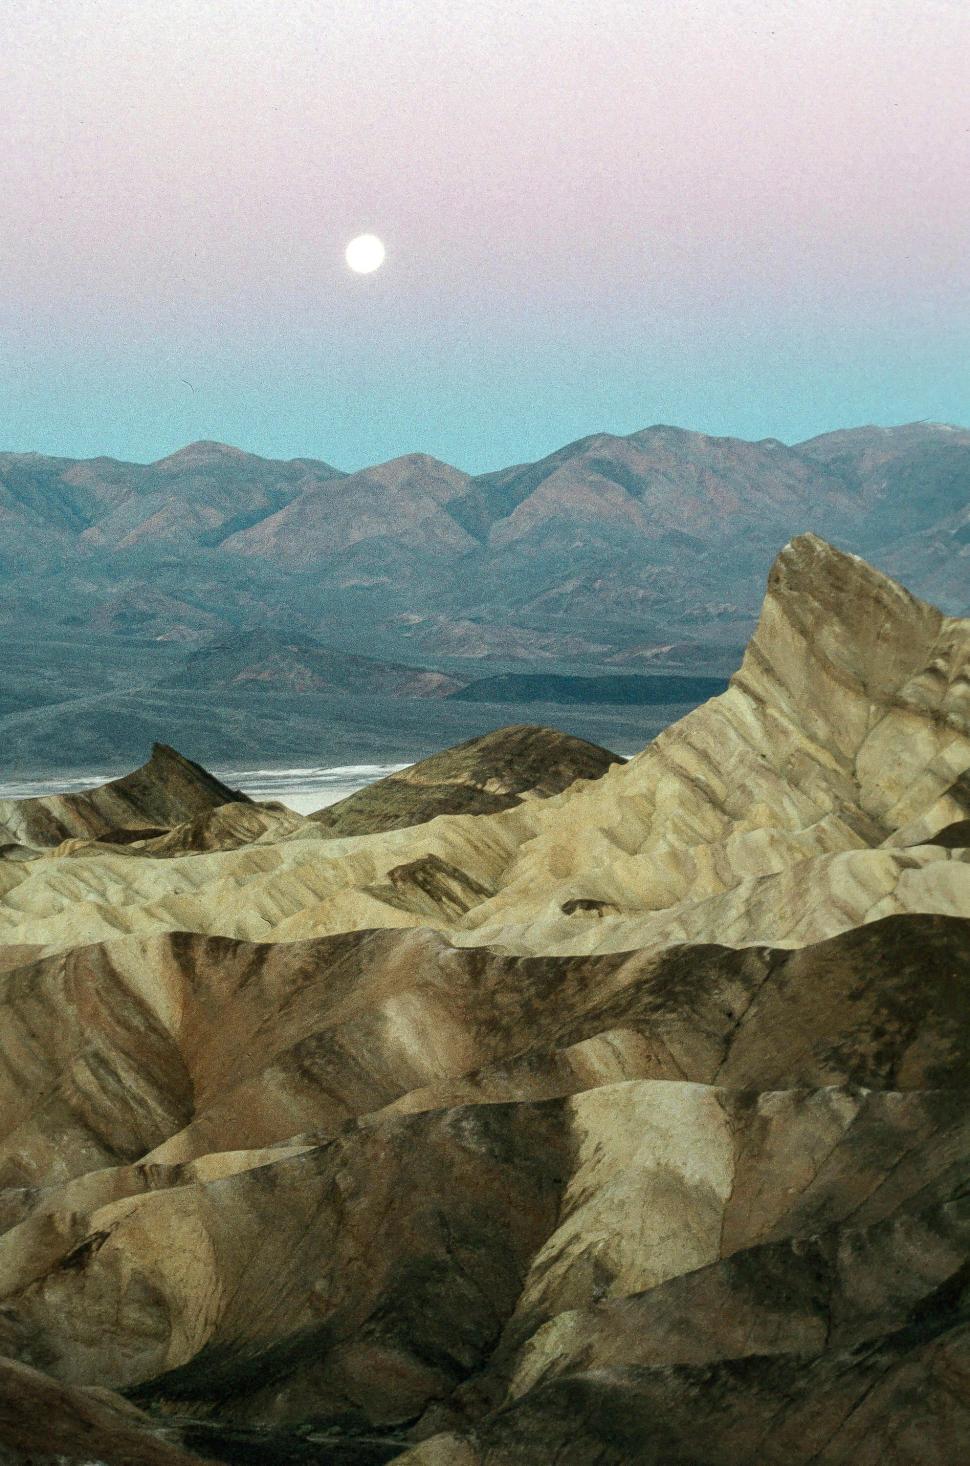 Free Image of Zabriskie Point in Death Valley National Park, California 